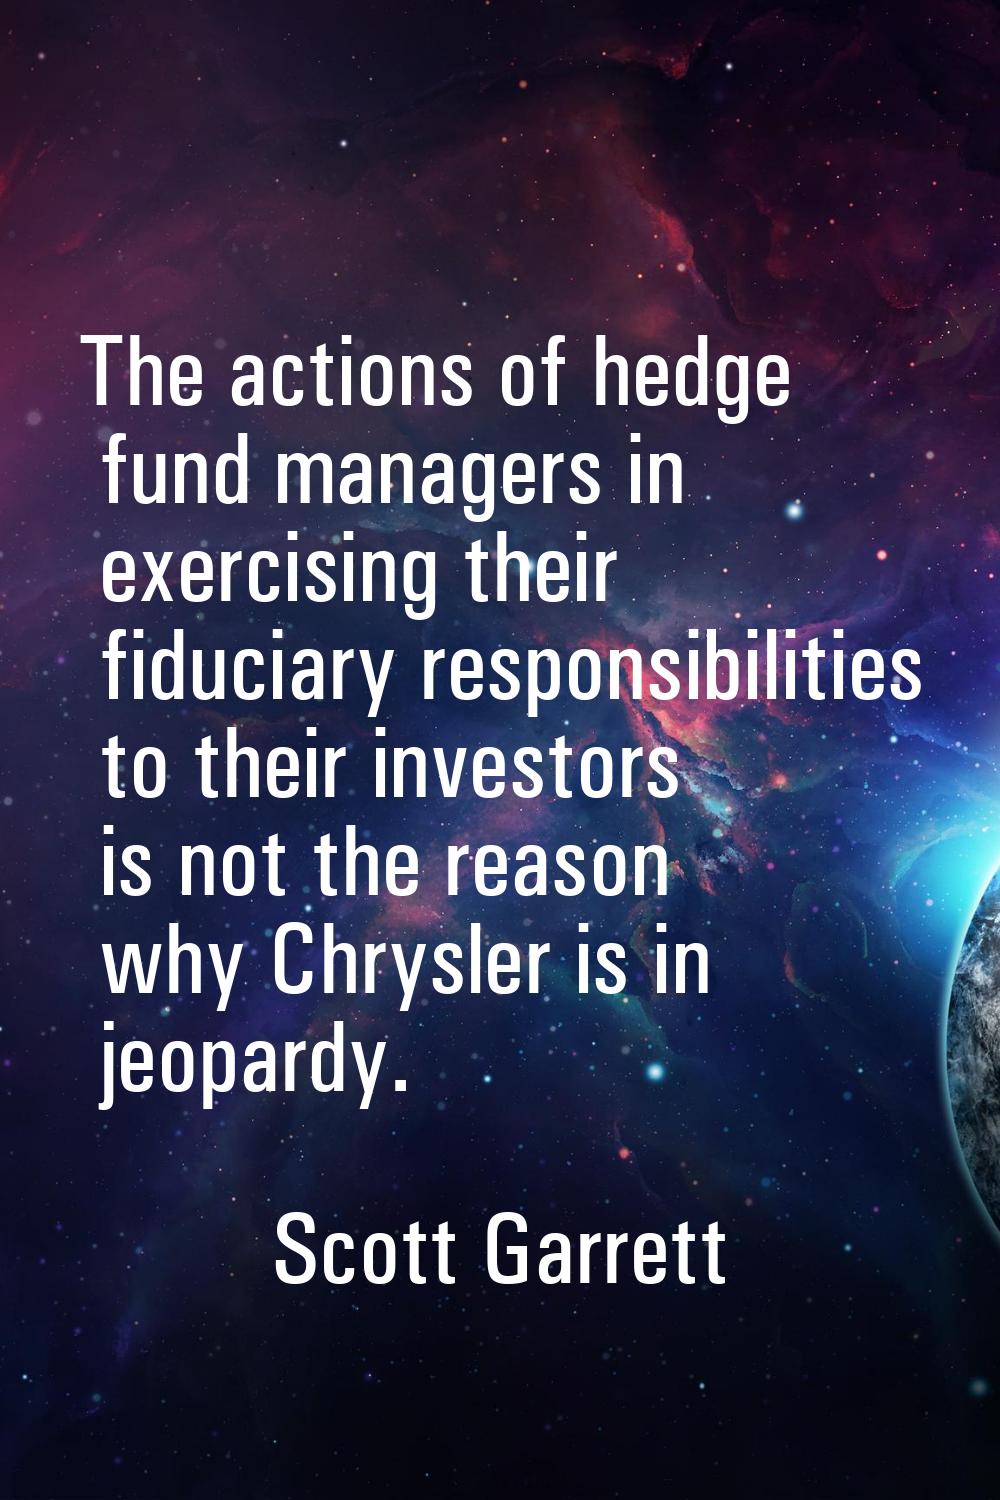 The actions of hedge fund managers in exercising their fiduciary responsibilities to their investor